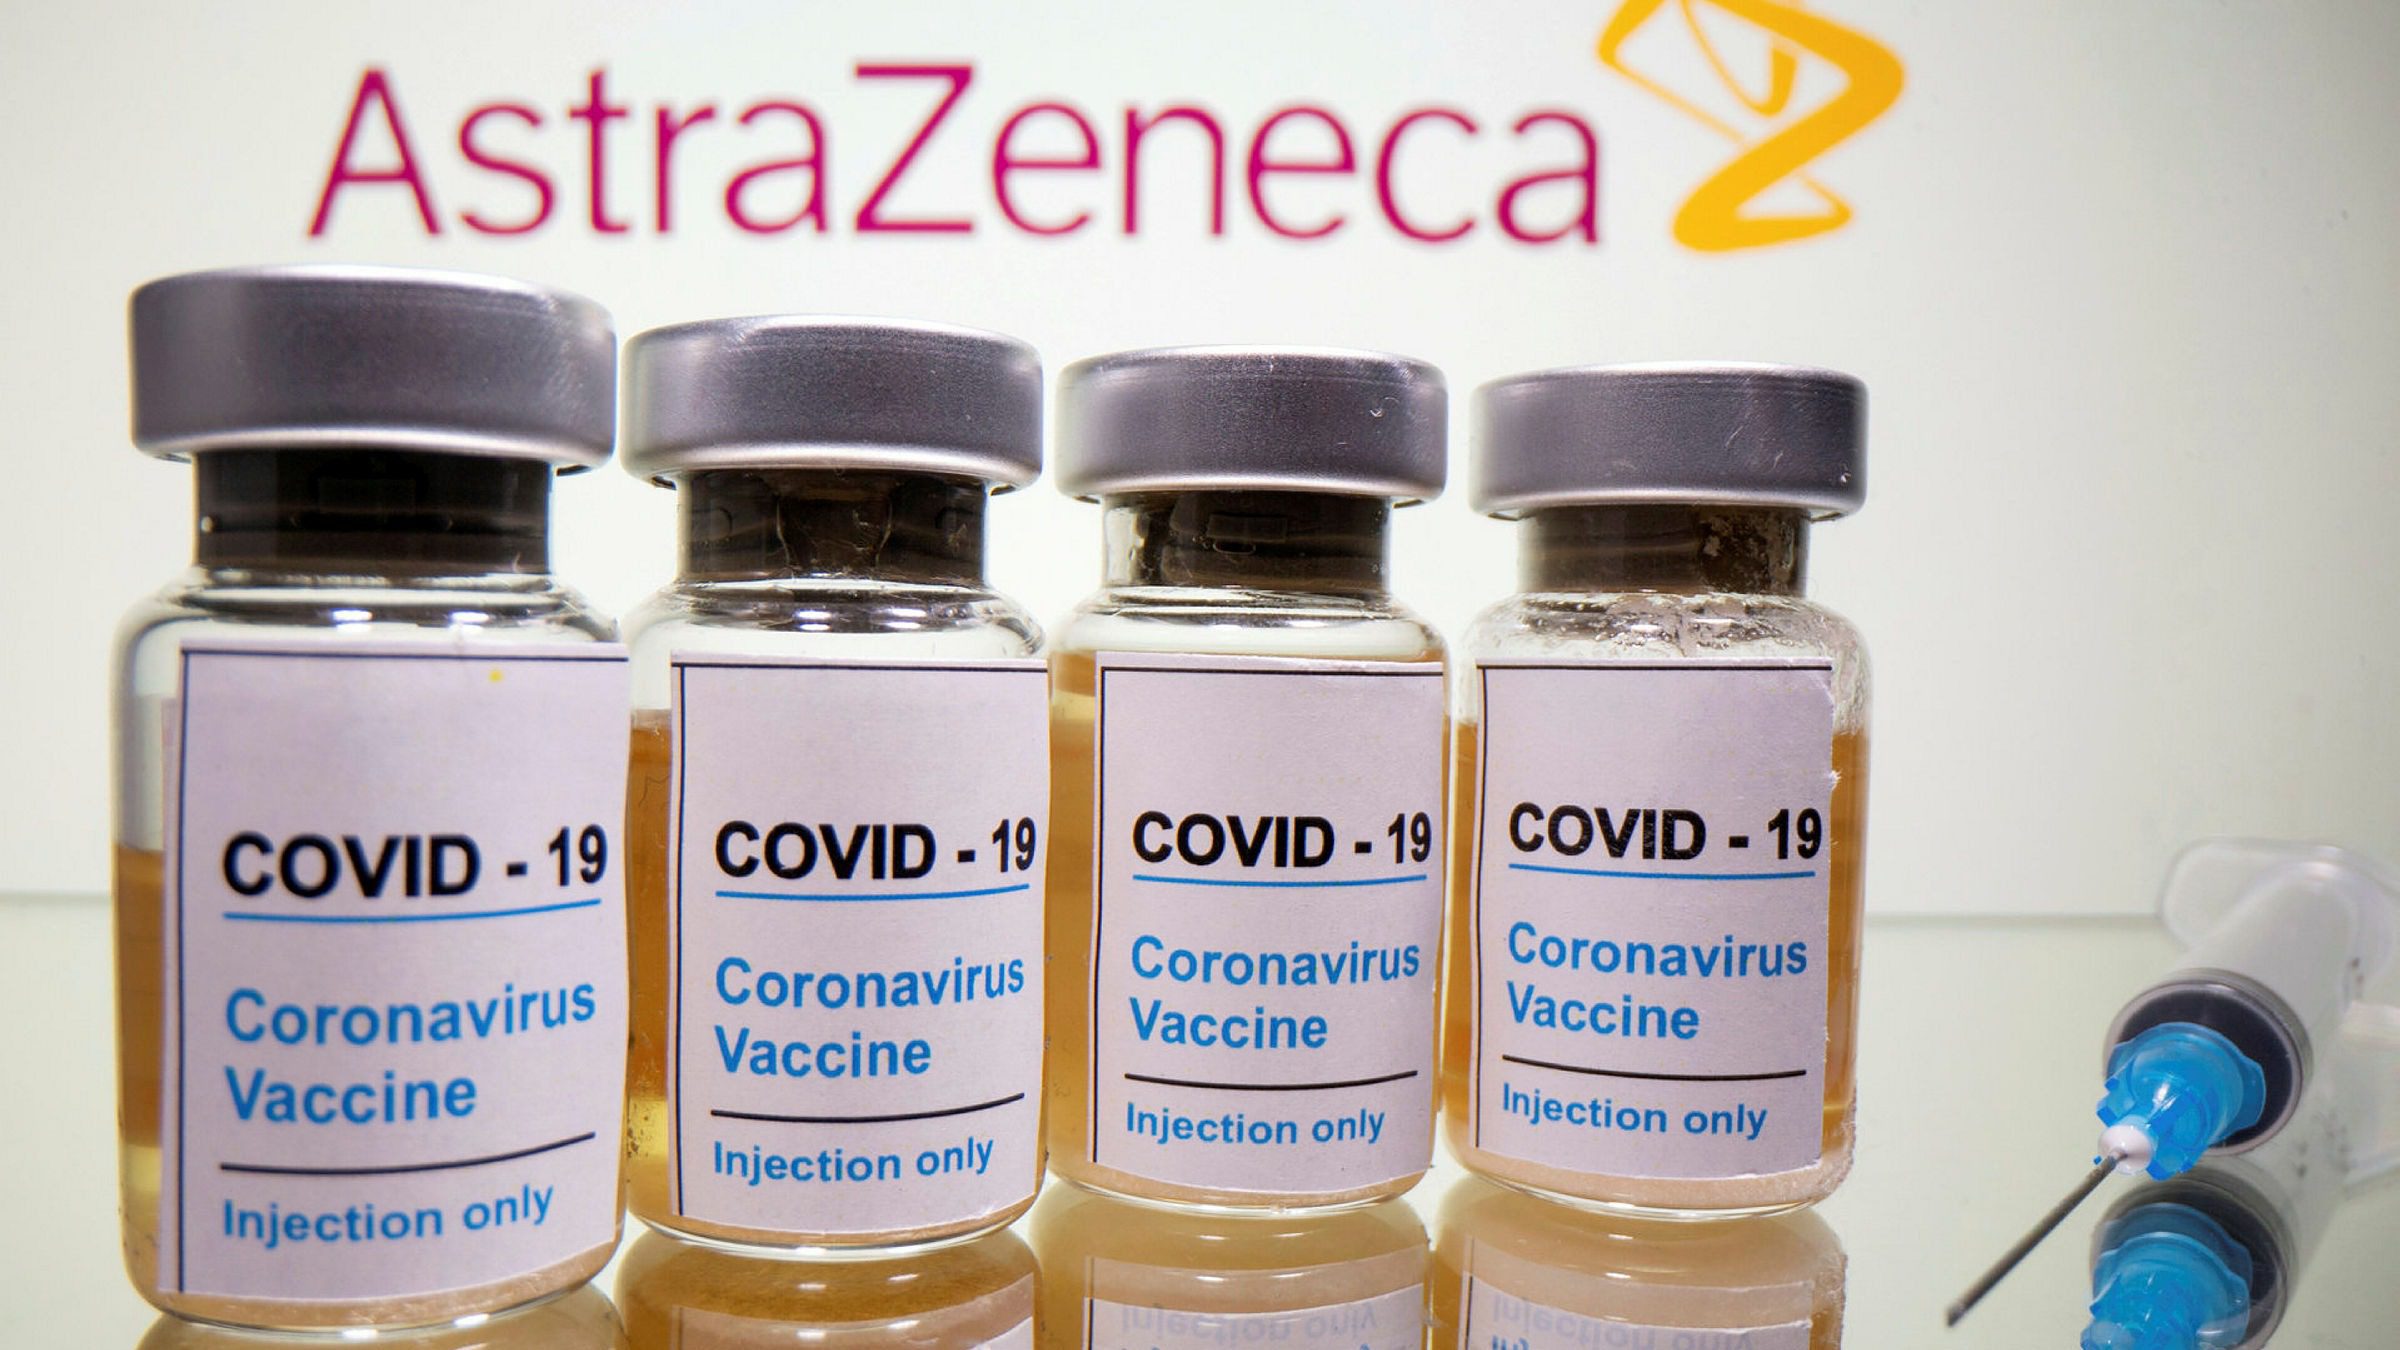 man-who-loved-to-run-now-can-barely-walk-due-to-astrazeneca-vaccine